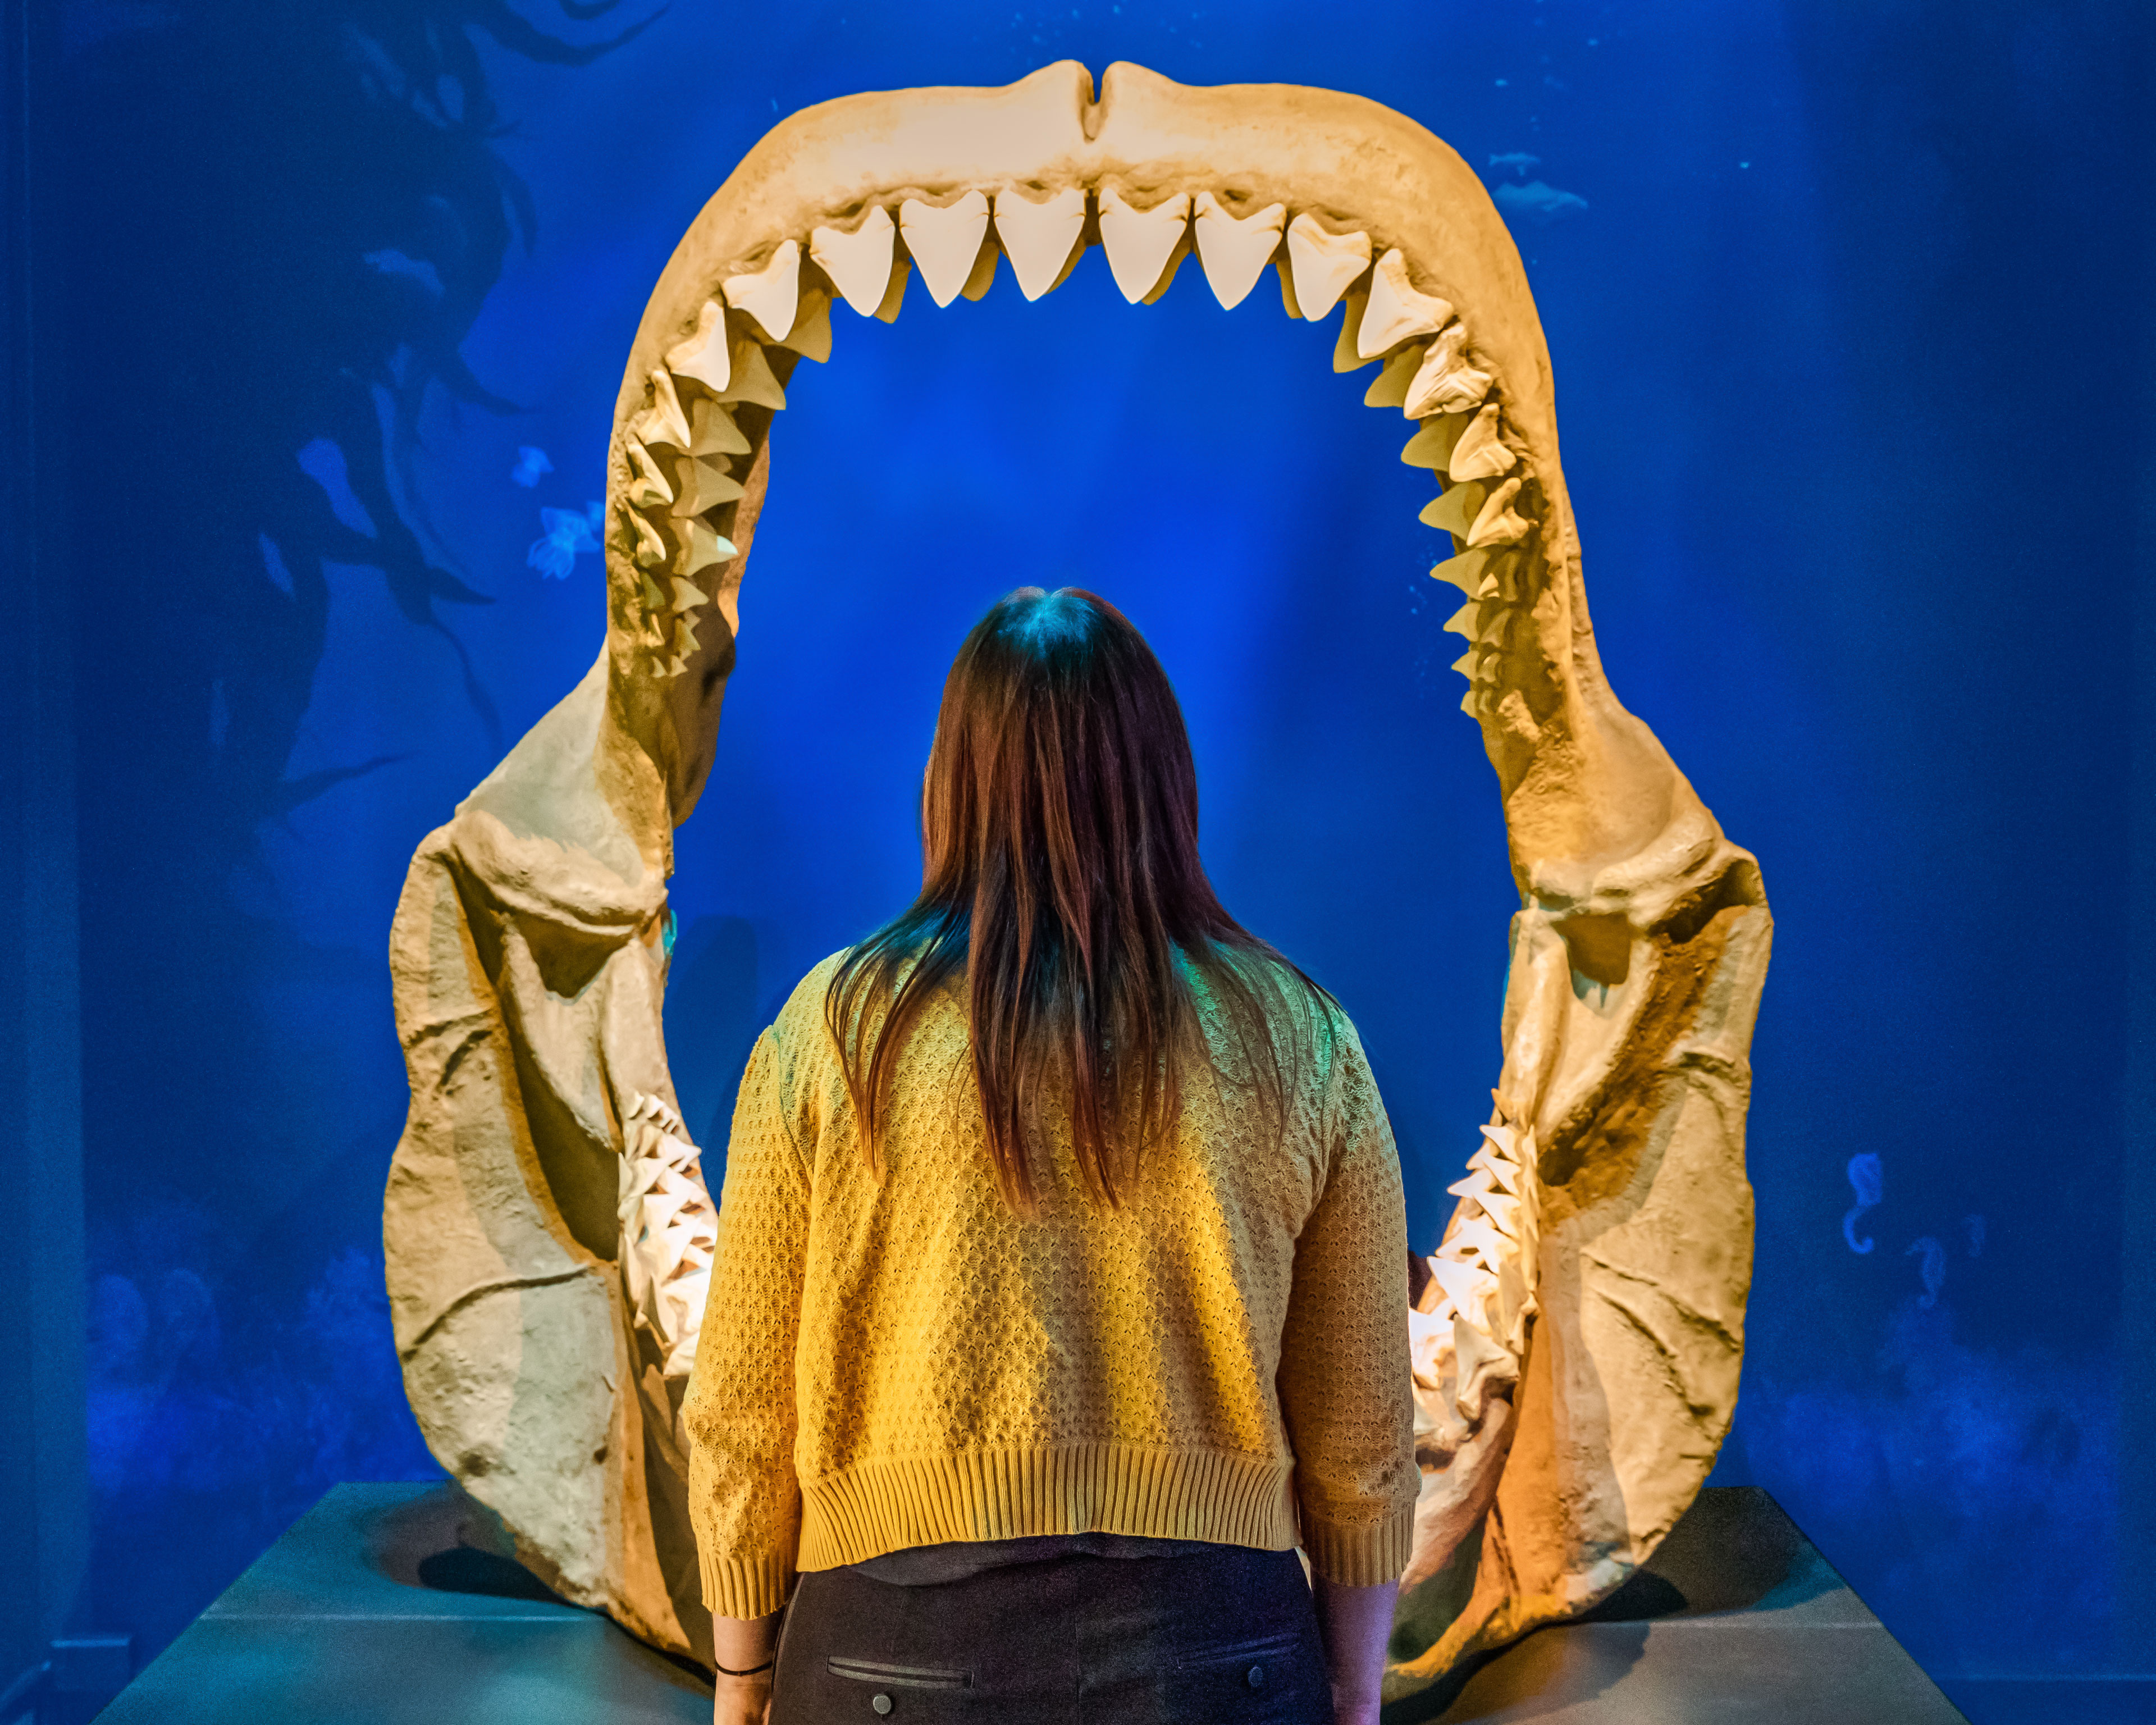 Sharks | A new exhibit at California Academy of Sciences